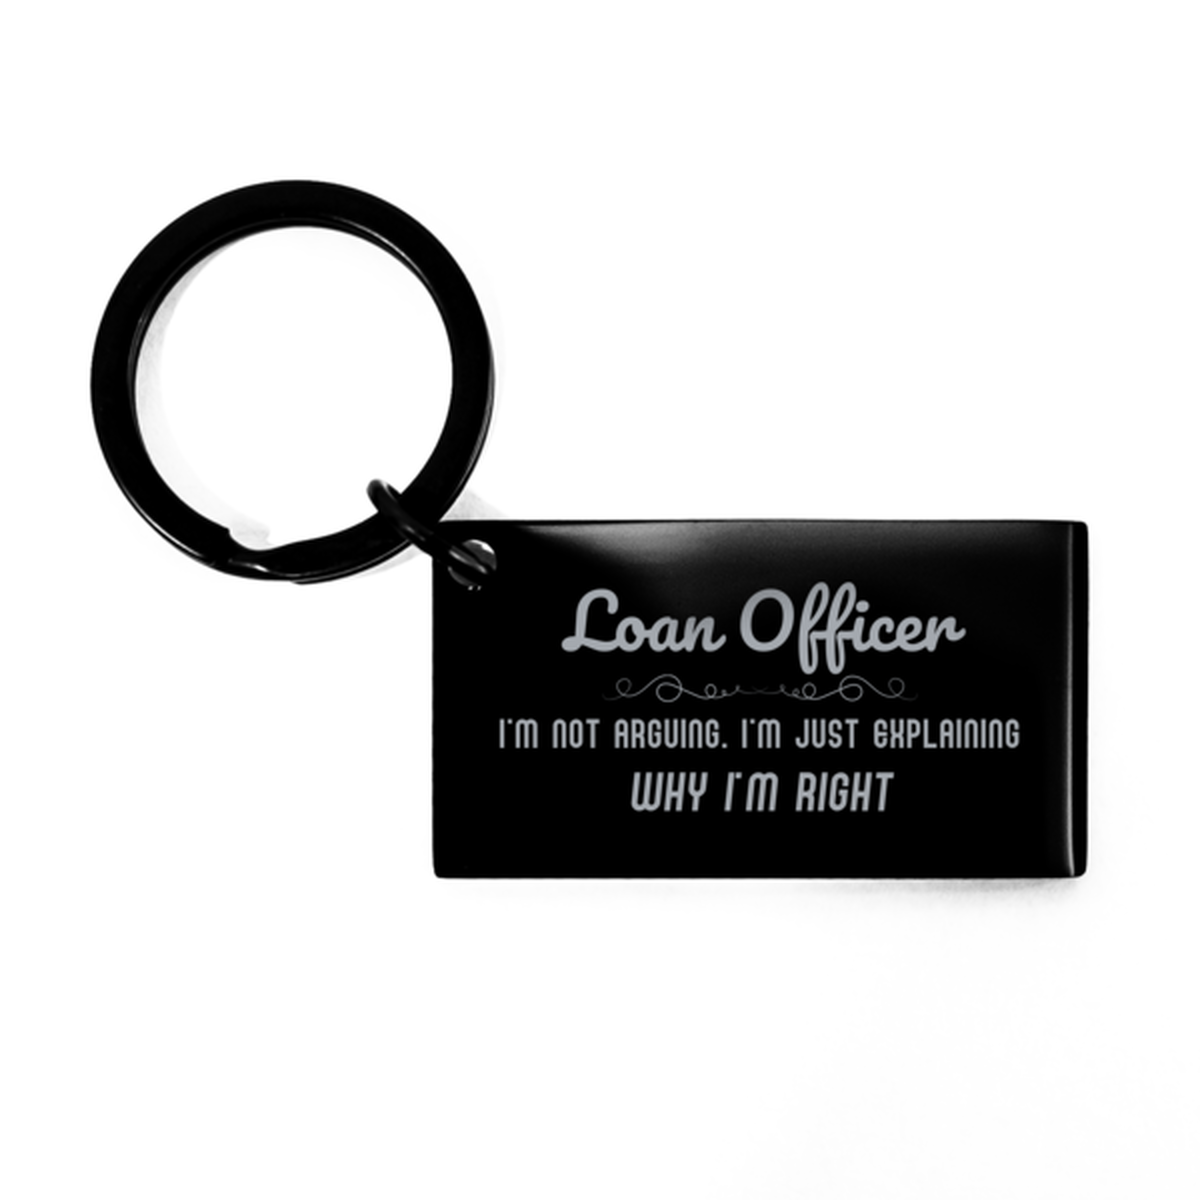 Loan Officer I'm not Arguing. I'm Just Explaining Why I'm RIGHT Keychain, Funny Saying Quote Loan Officer Gifts For Loan Officer Graduation Birthday Christmas Gifts for Men Women Coworker